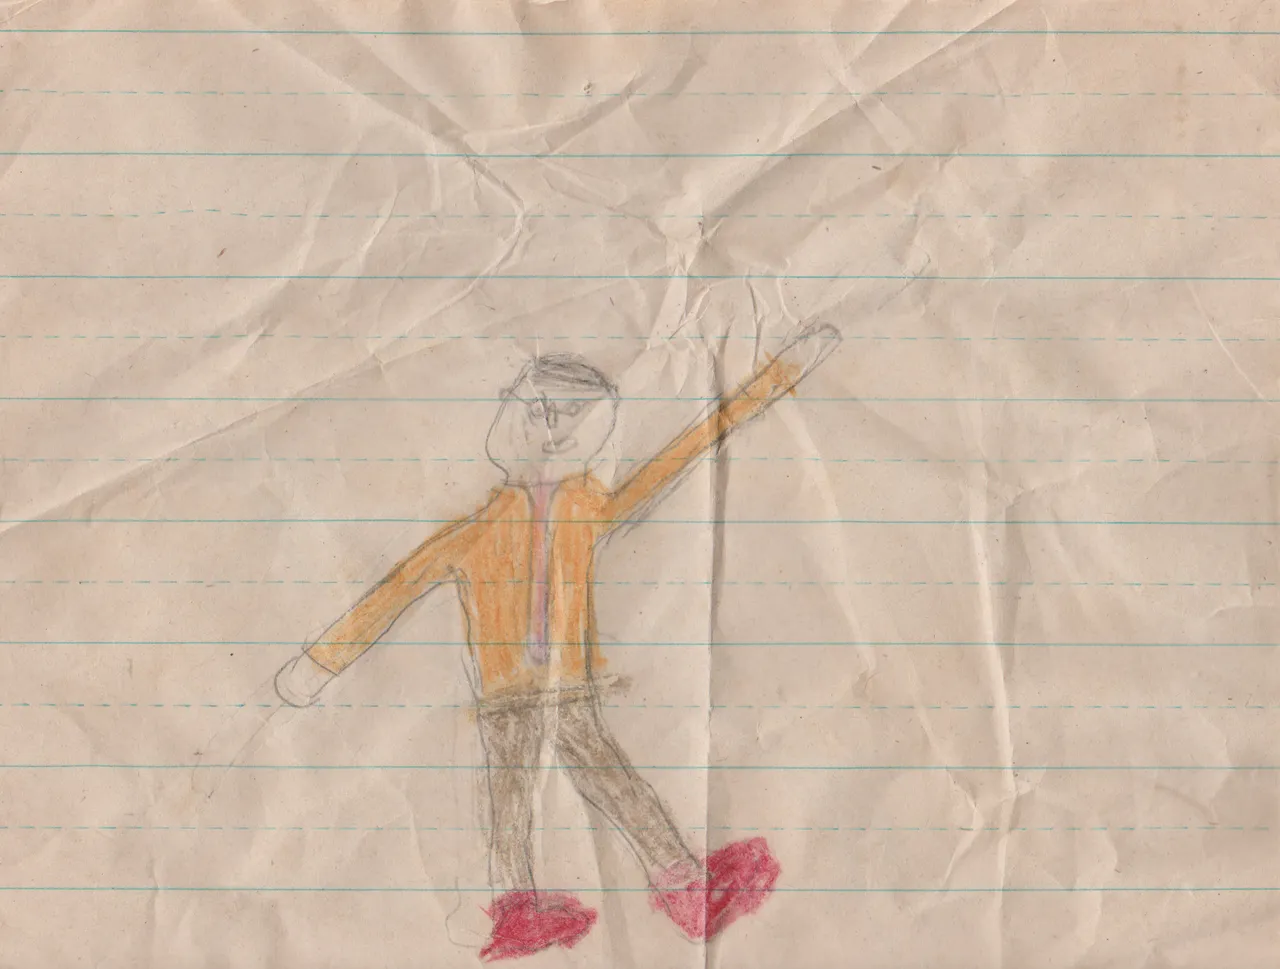 1990s - Joey Arnold drawing himself waving, maybe 1995, not sure when-1.png